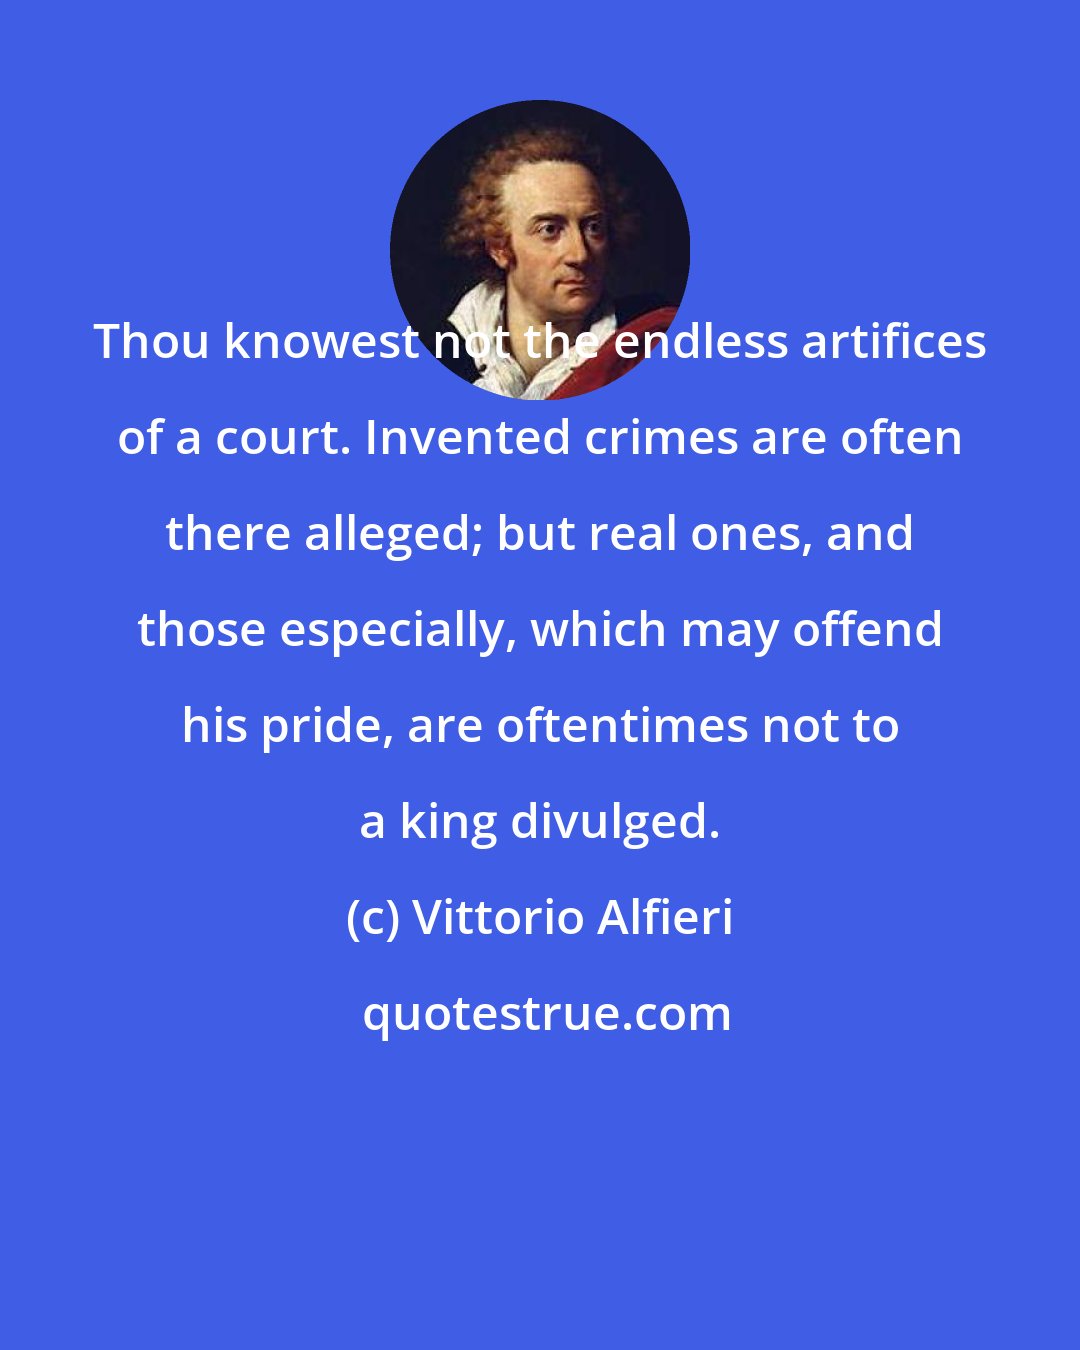 Vittorio Alfieri: Thou knowest not the endless artifices of a court. Invented crimes are often there alleged; but real ones, and those especially, which may offend his pride, are oftentimes not to a king divulged.